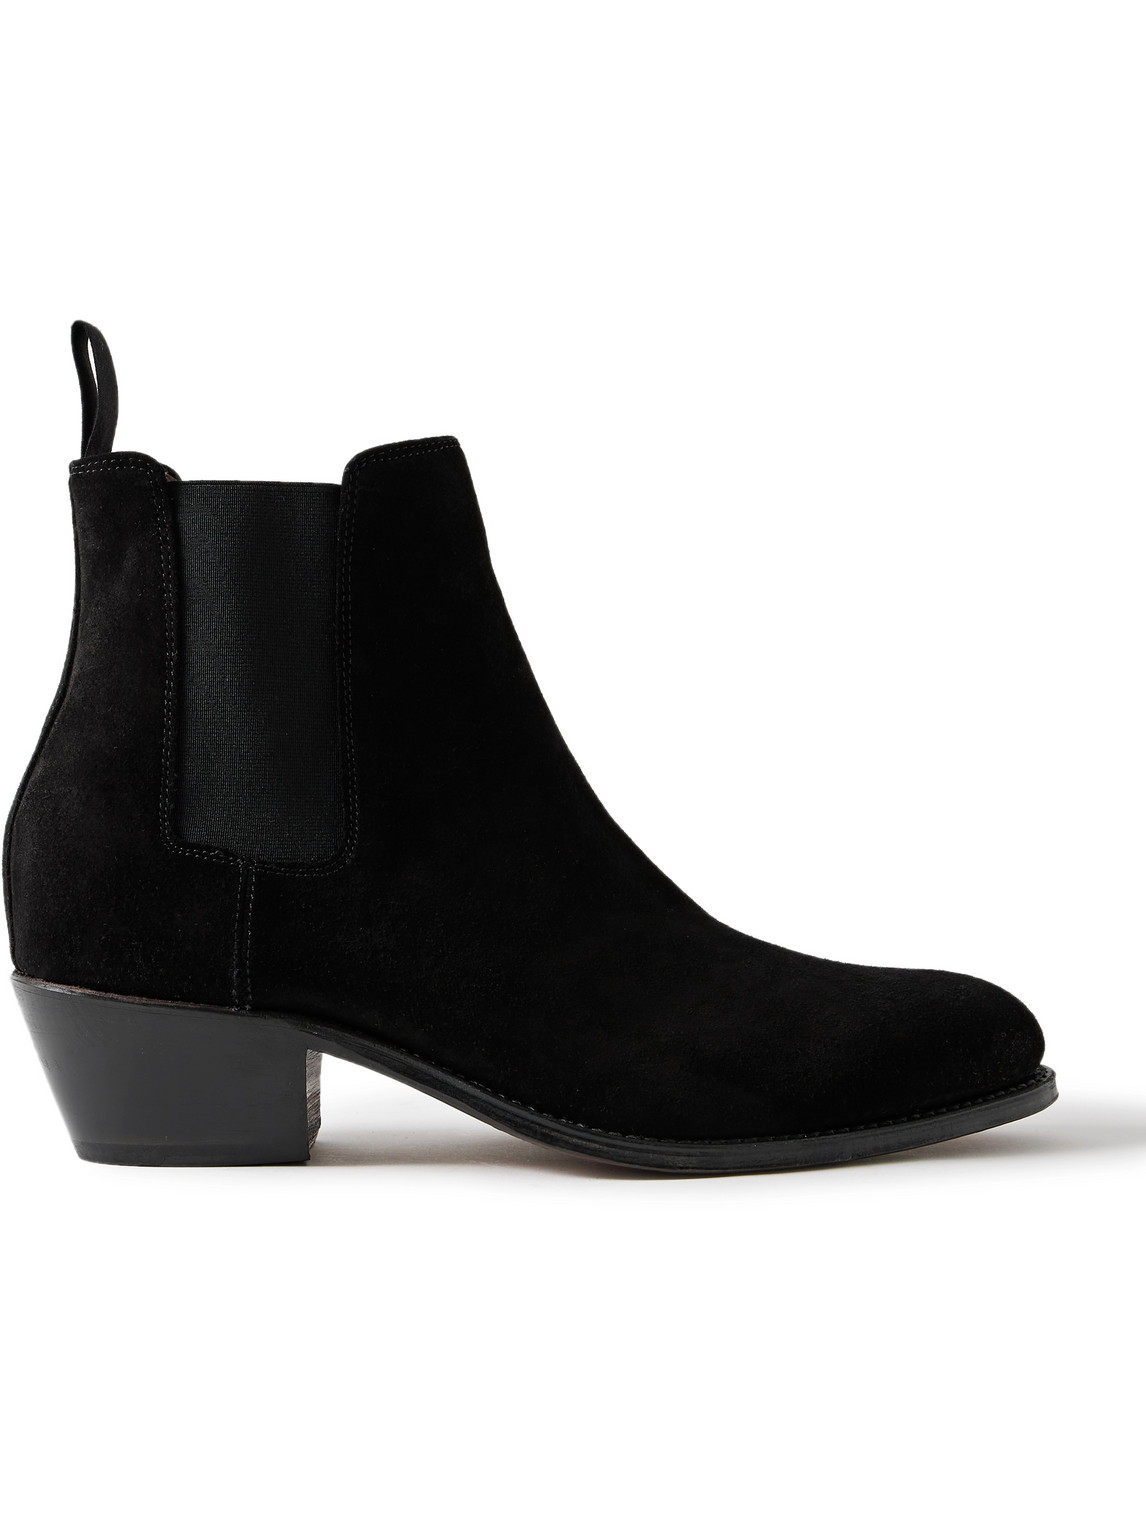 Grenson Marco 222f Suede Chelsea Boots In Black